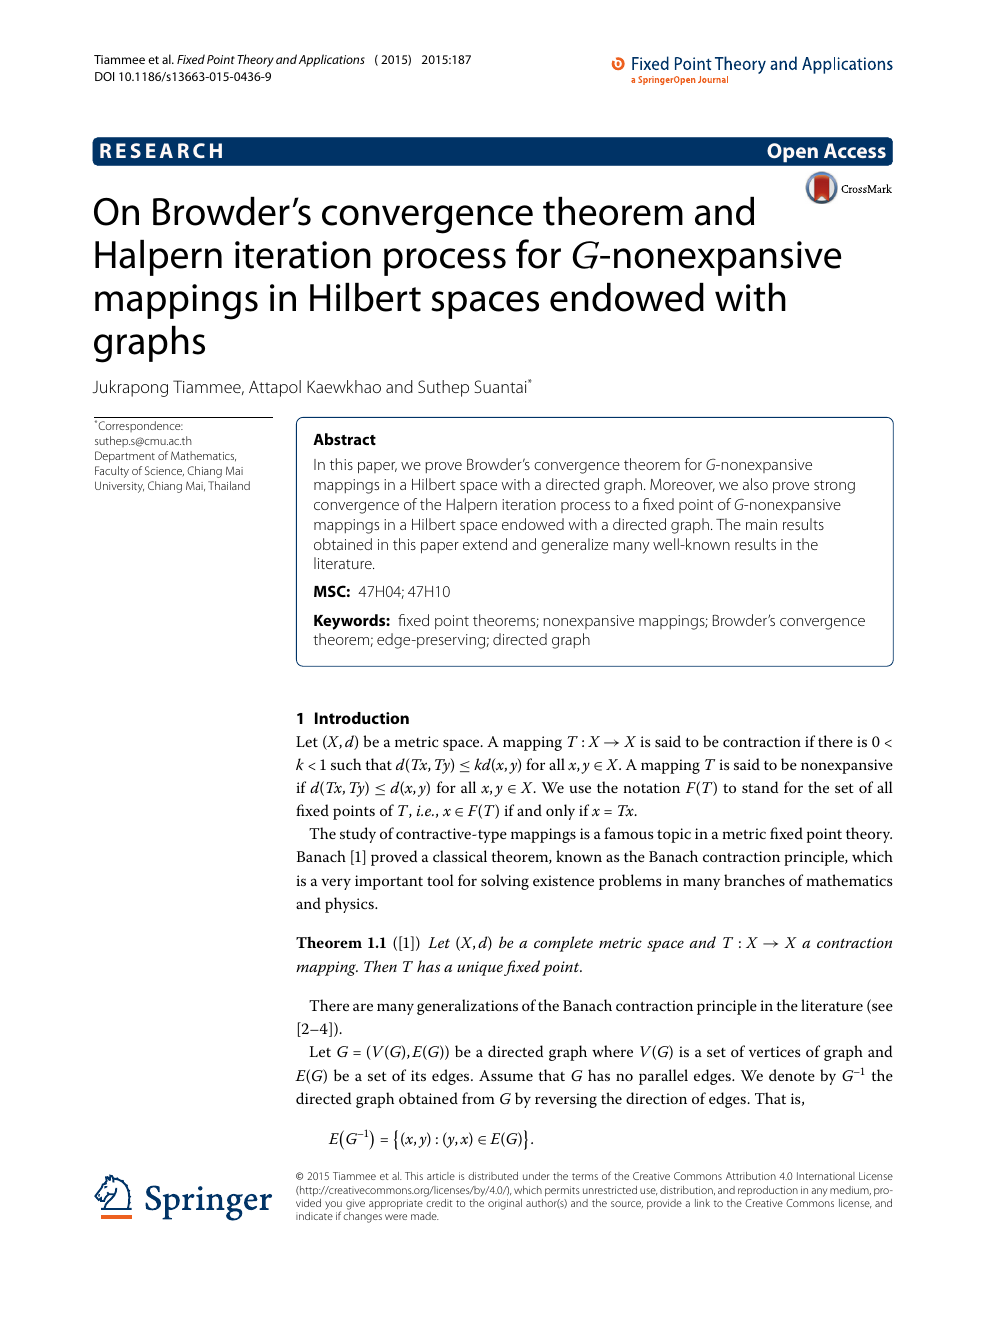 On Browder S Convergence Theorem And Halpern Iteration Process For G Nonexpansive Mappings In Hilbert Spaces Endowed With Graphs Topic Of Research Paper In Mathematics Download Scholarly Article Pdf And Read For Free